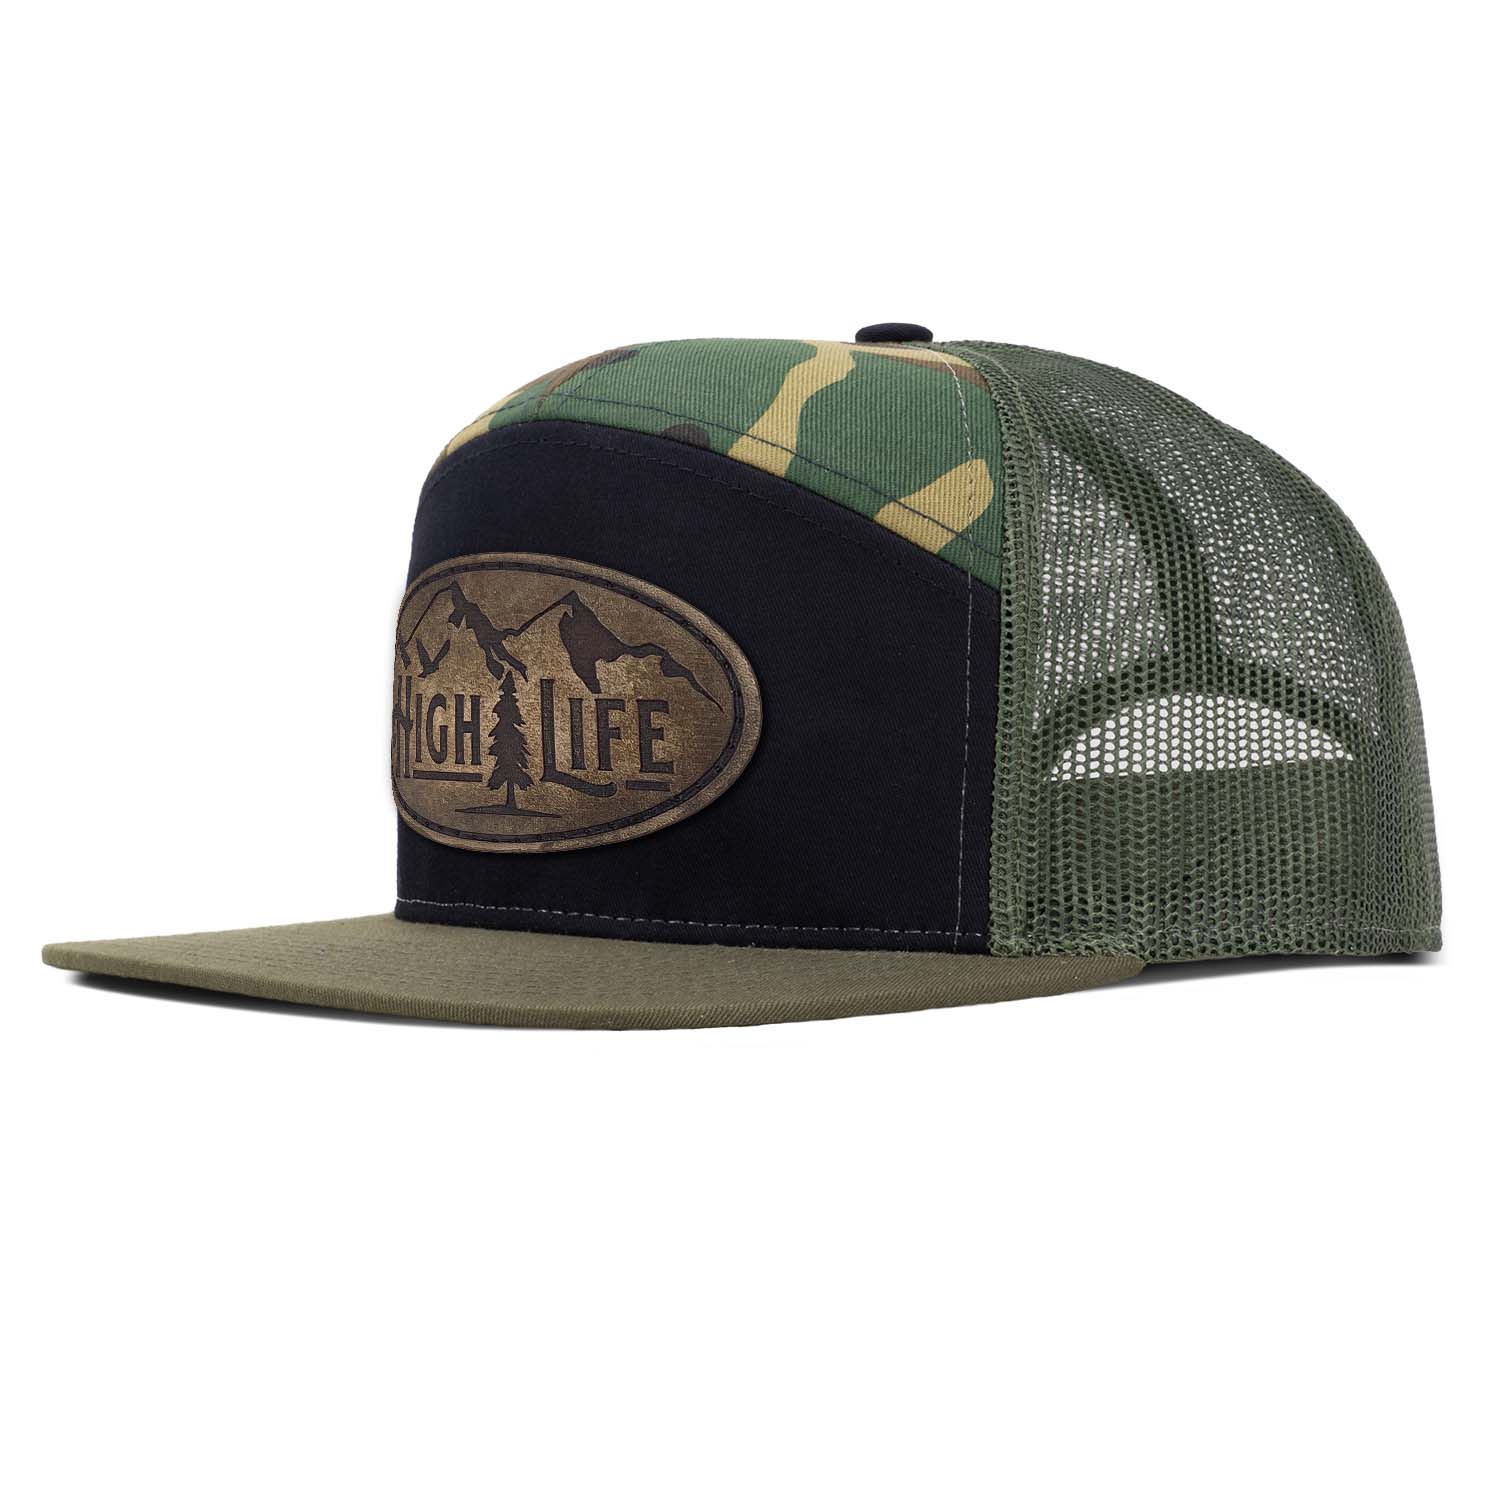 Revolution Mfg loden, black, and woodland camo 7 panel trucker hat with loden mesh featuring our full grain leather vintage finish High Life patch stitched on the seamless front panel